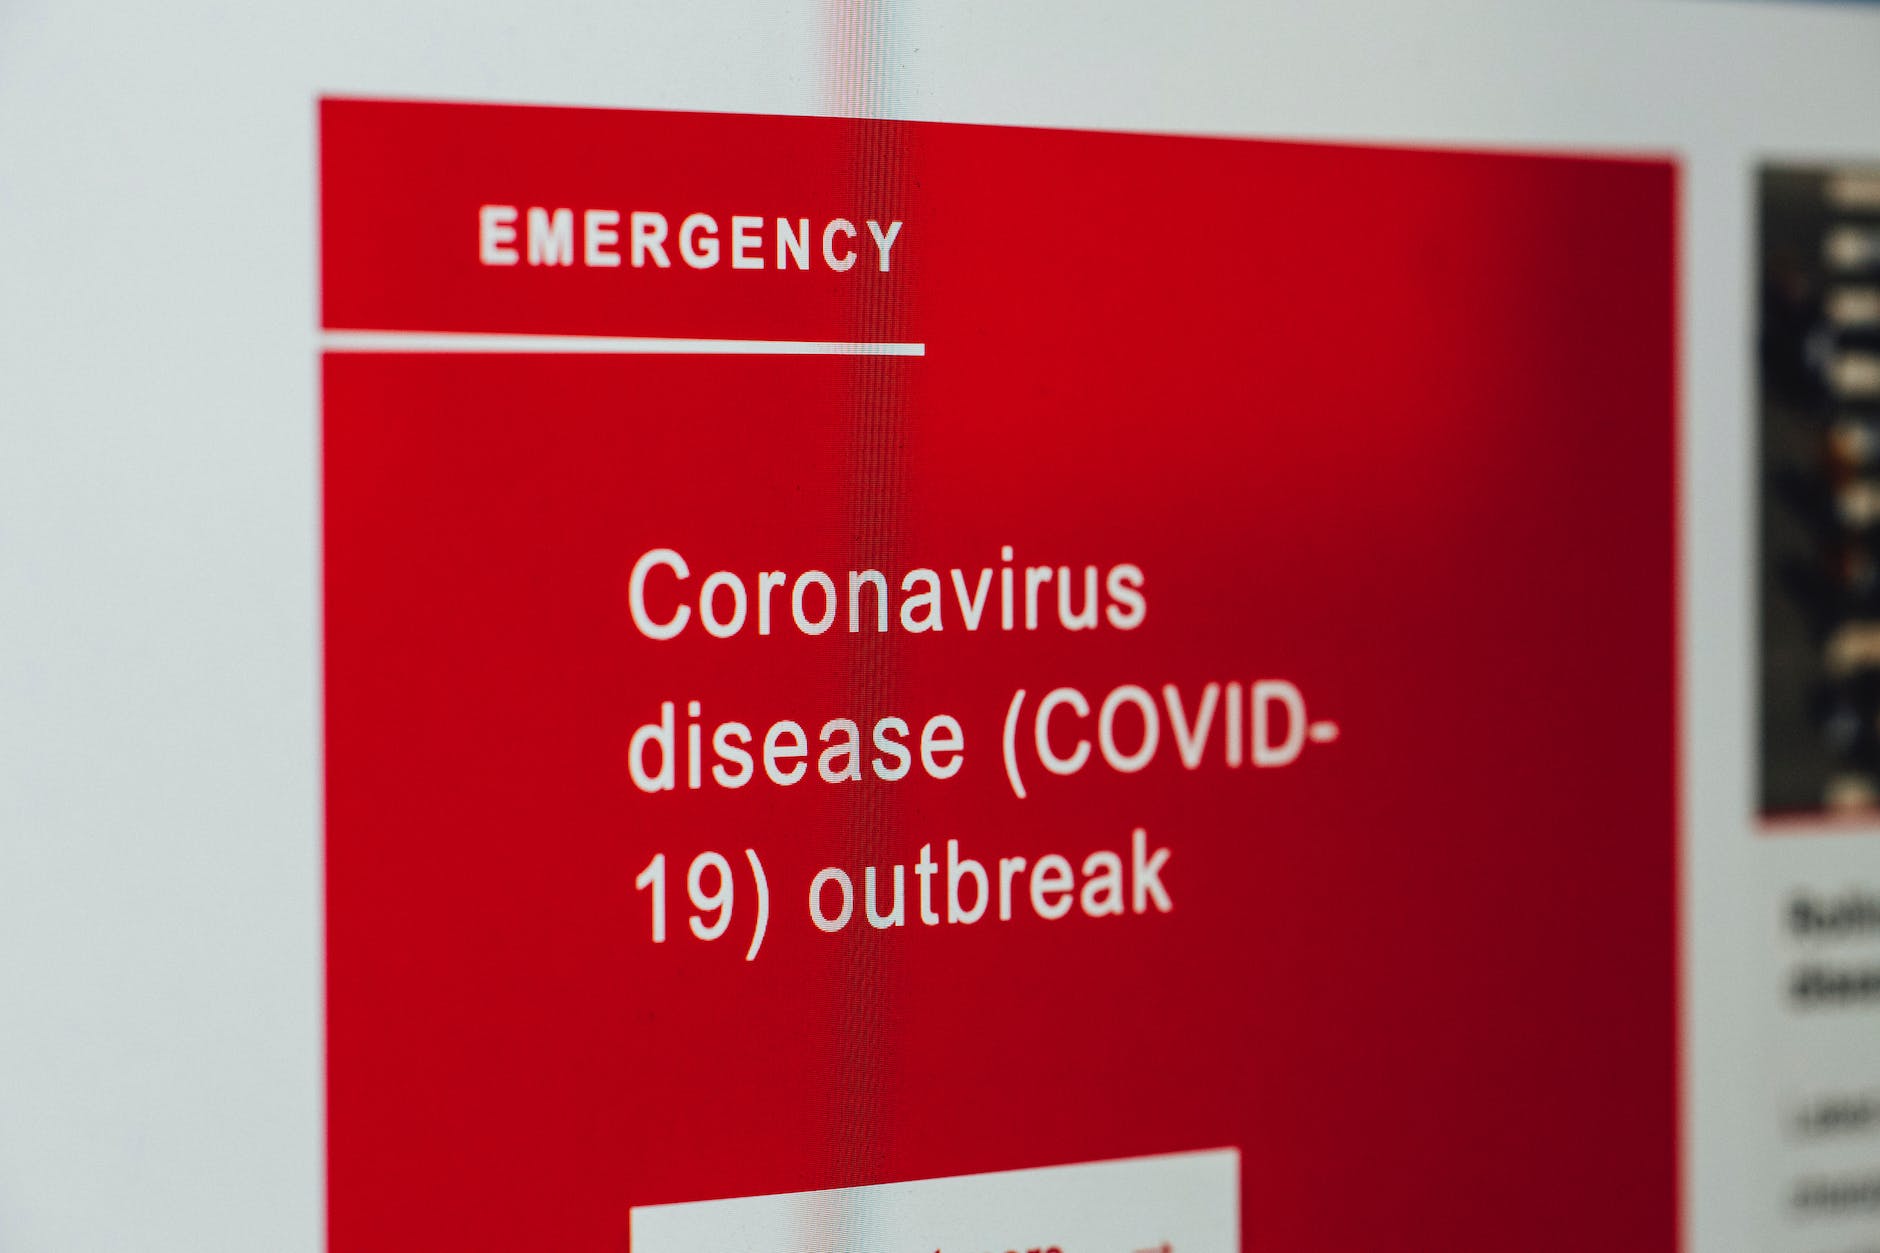 The latest COVID-19 news and case numbers from around the states and territories